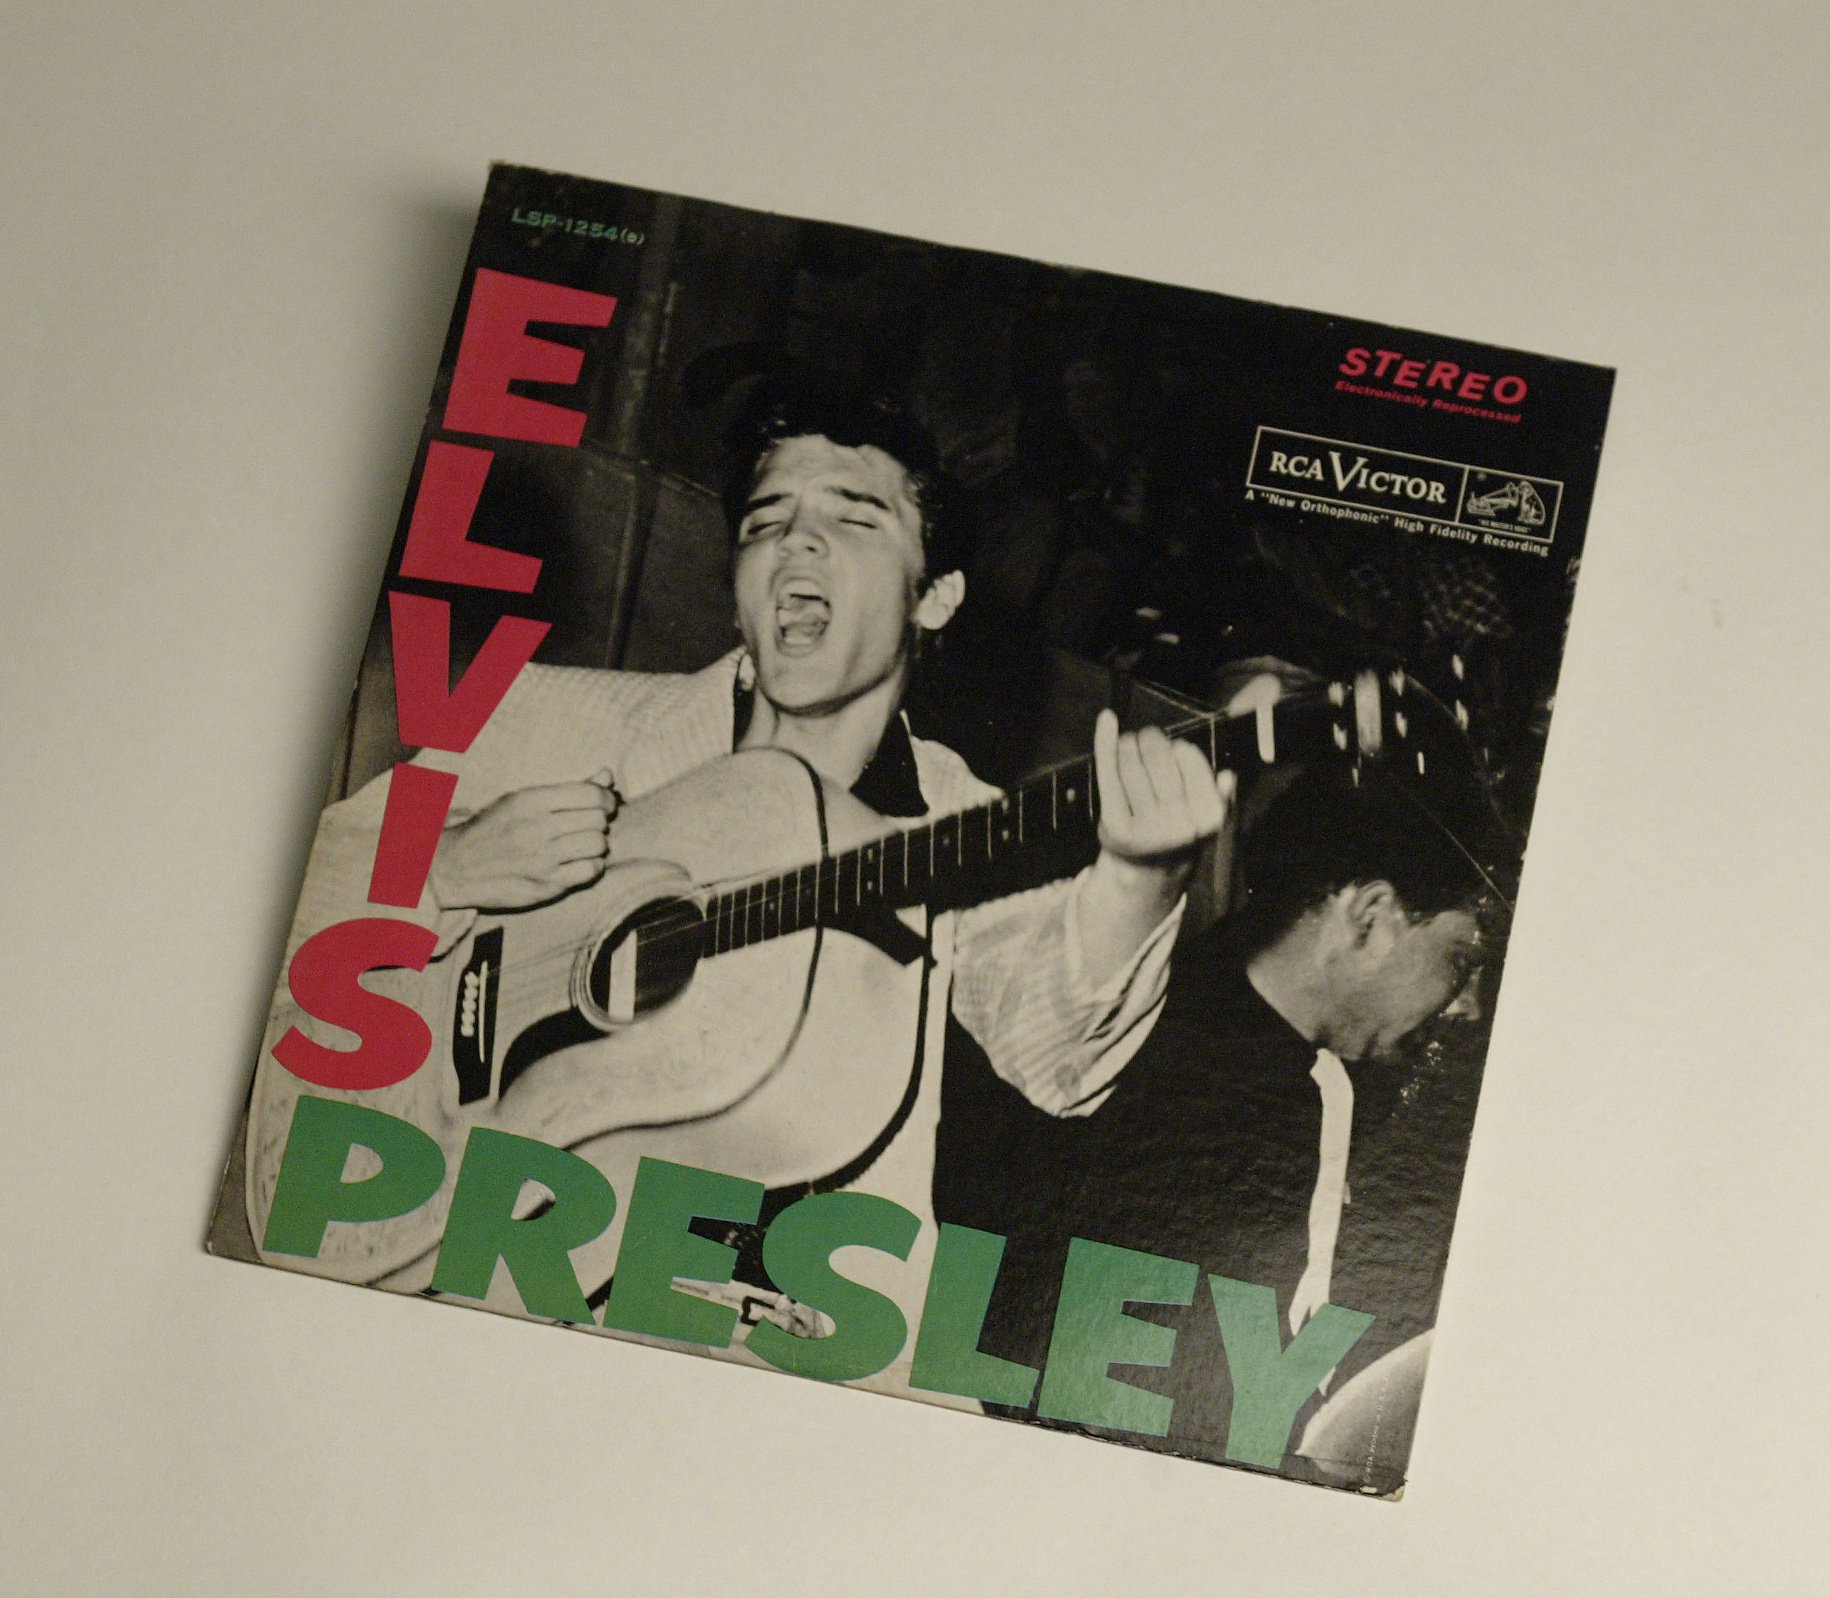 Elvis Presley singing a song on the cover of his first album